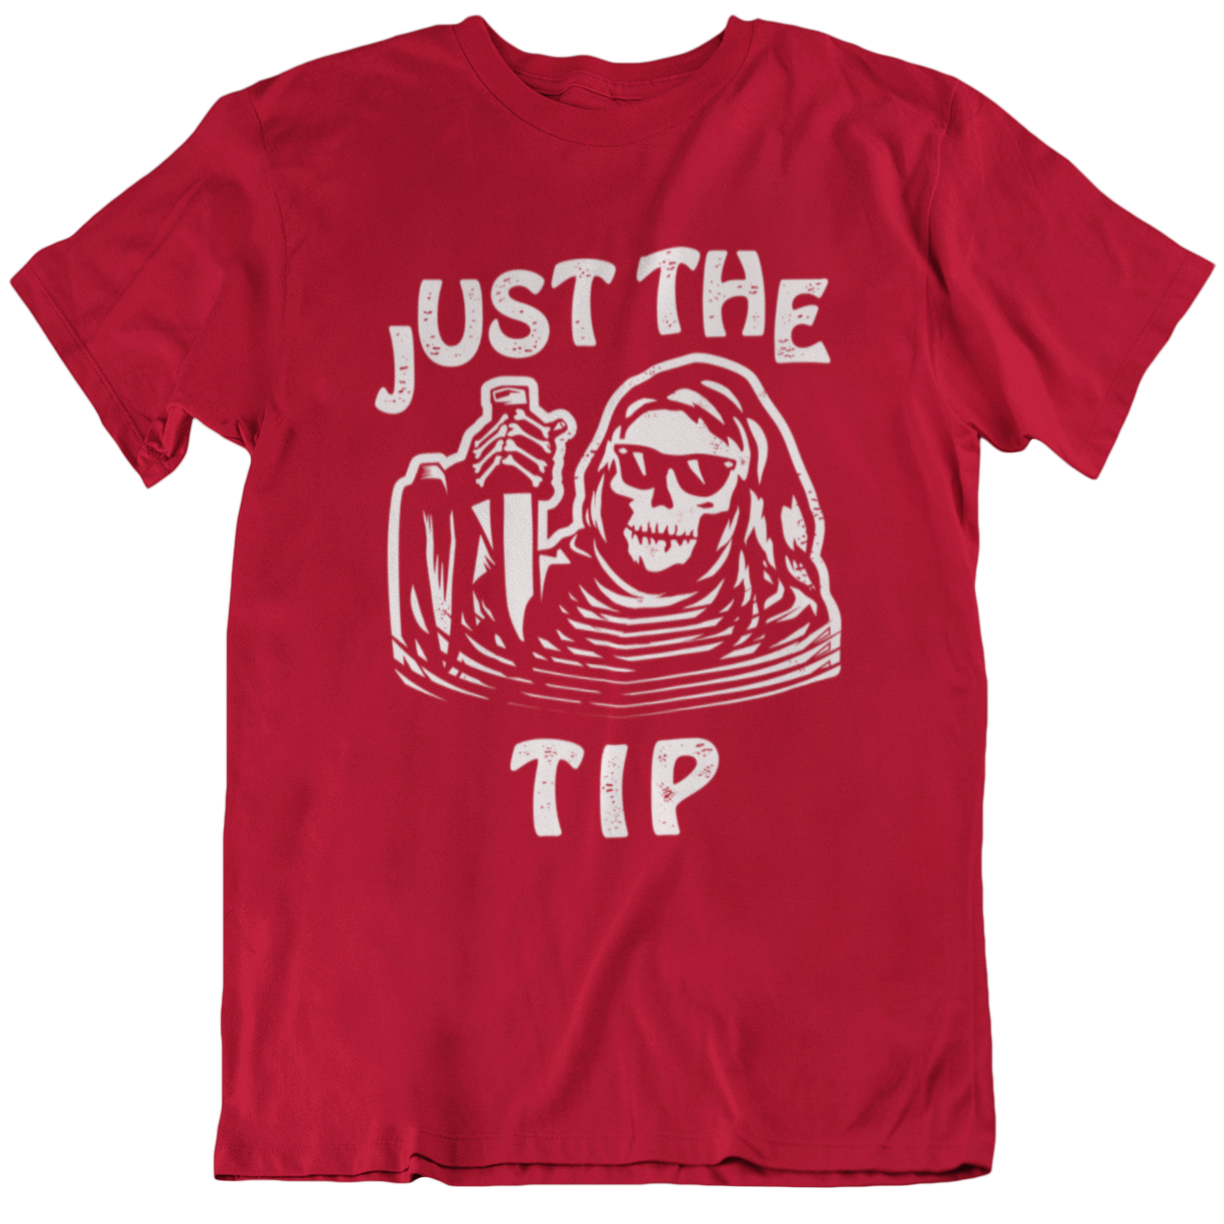 Funny red t-shirt for Latino men. The graphic is a humorous play on words. There is a tattoo-style skeleton holding a knife, and the words surrounding the image state "Just the Tip"